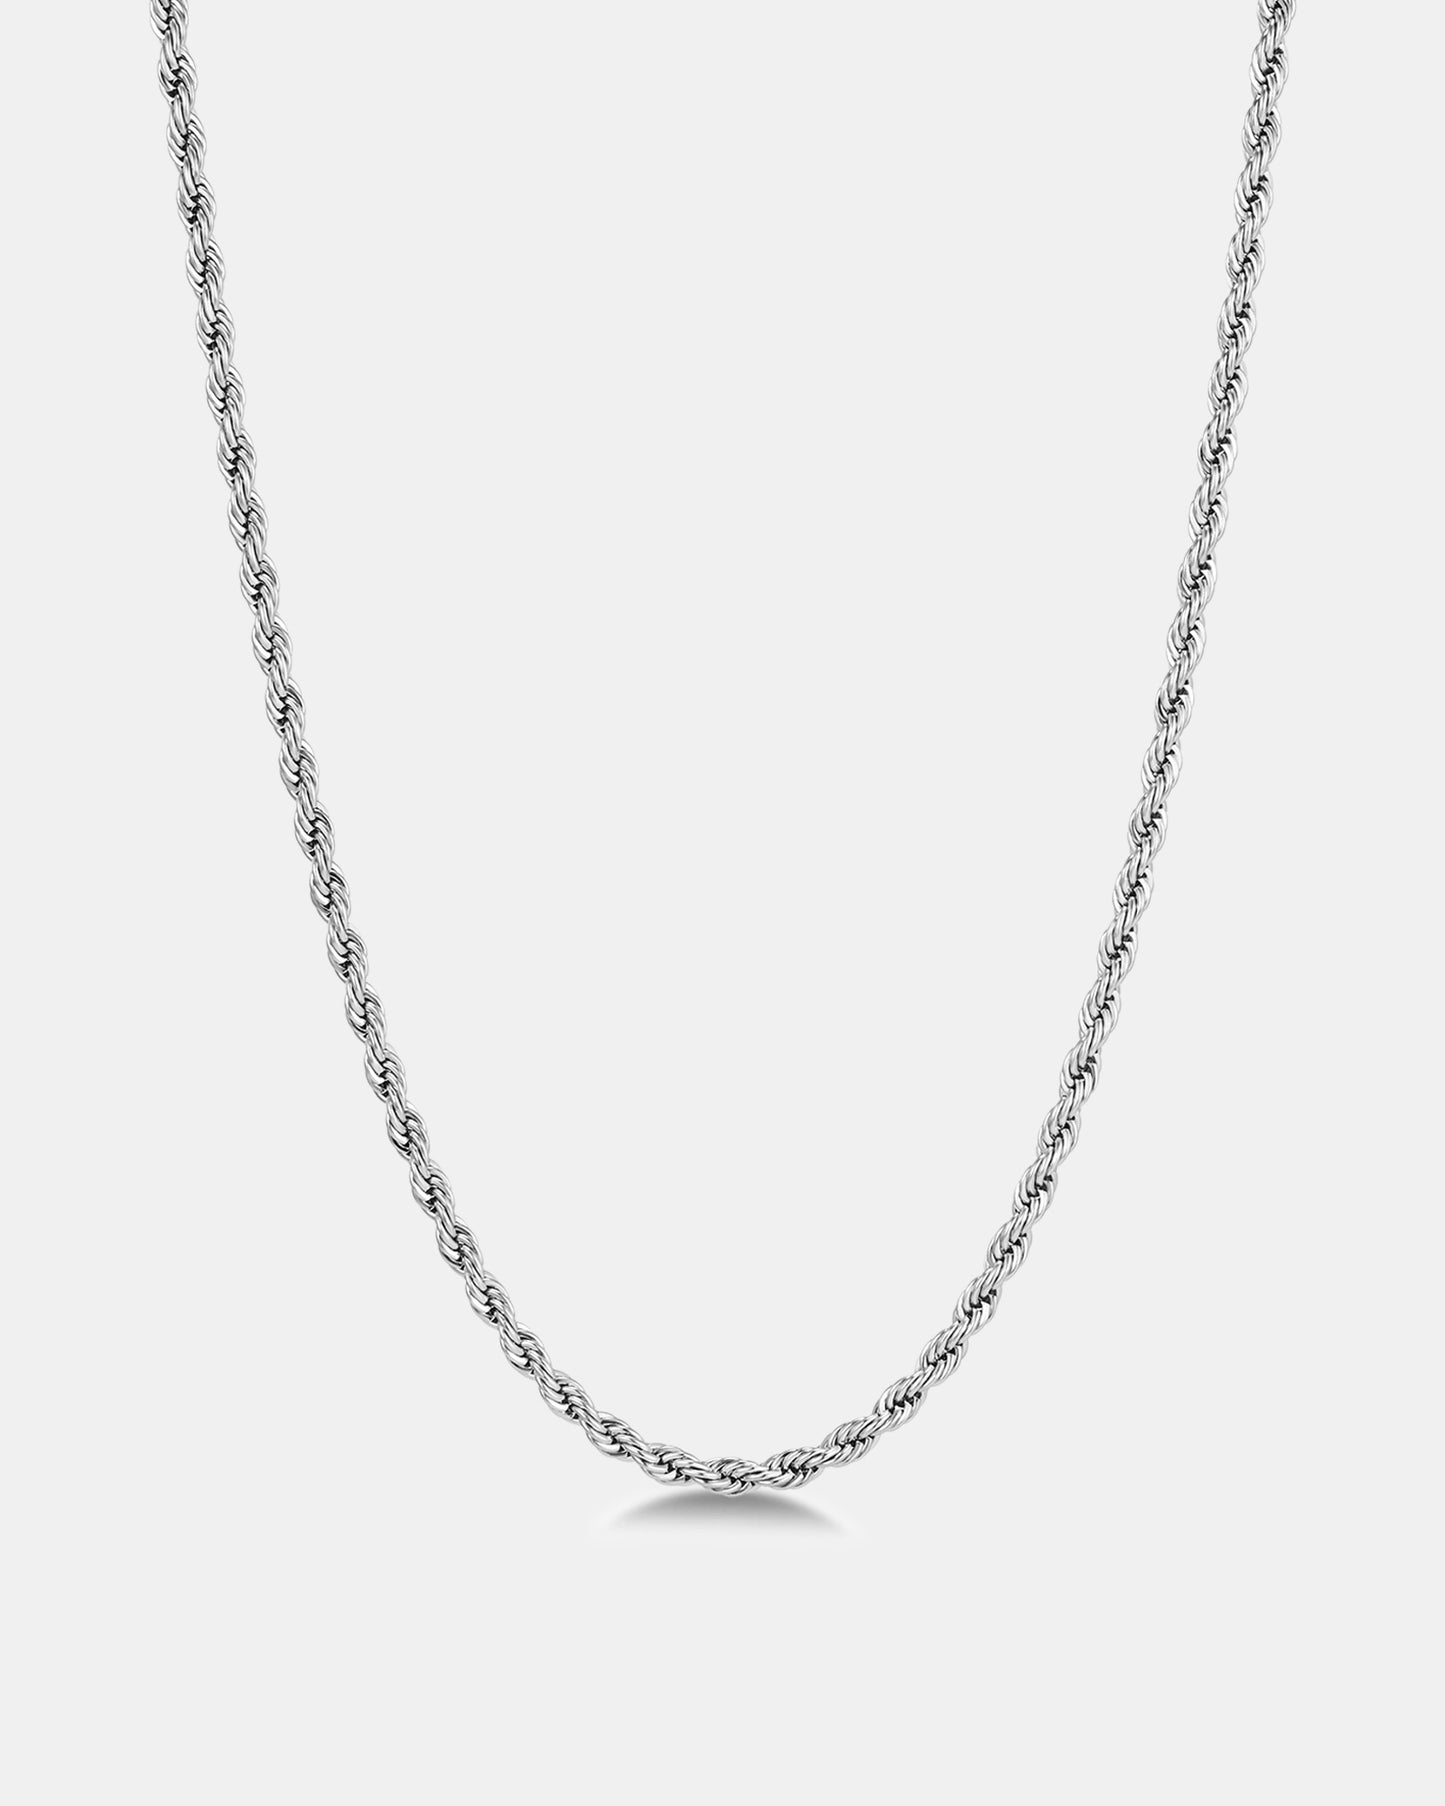 Nautical Rope Chain Necklace